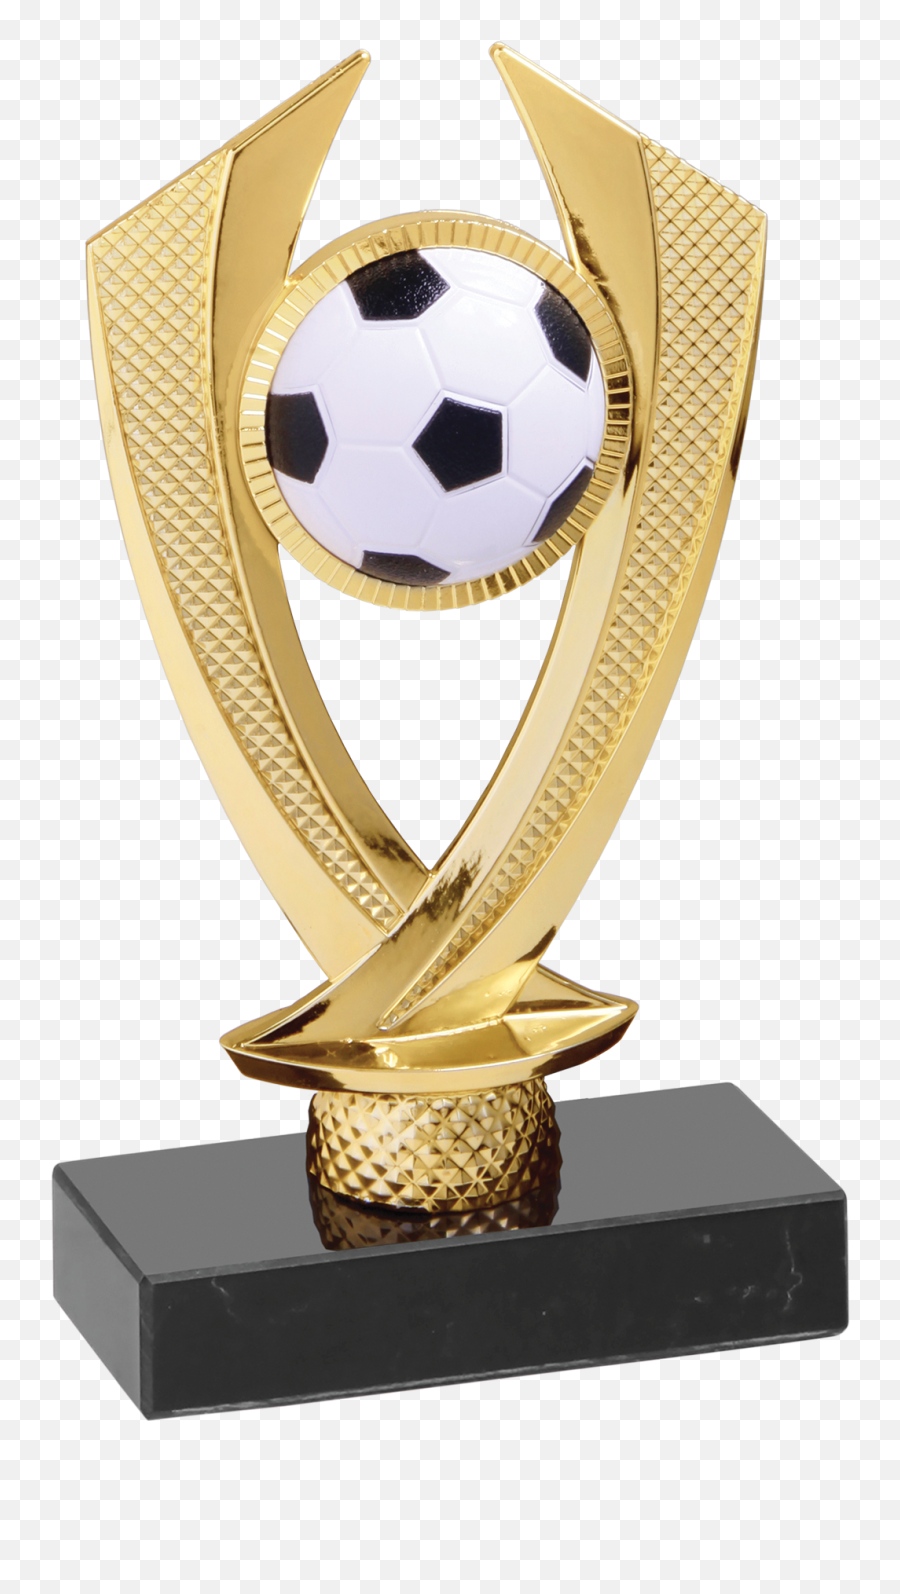 Soccer Trophy - 10 Free Hq Online Puzzle Games On Soccer Trophy Cartoon Png Emoji,Trophy Emoji